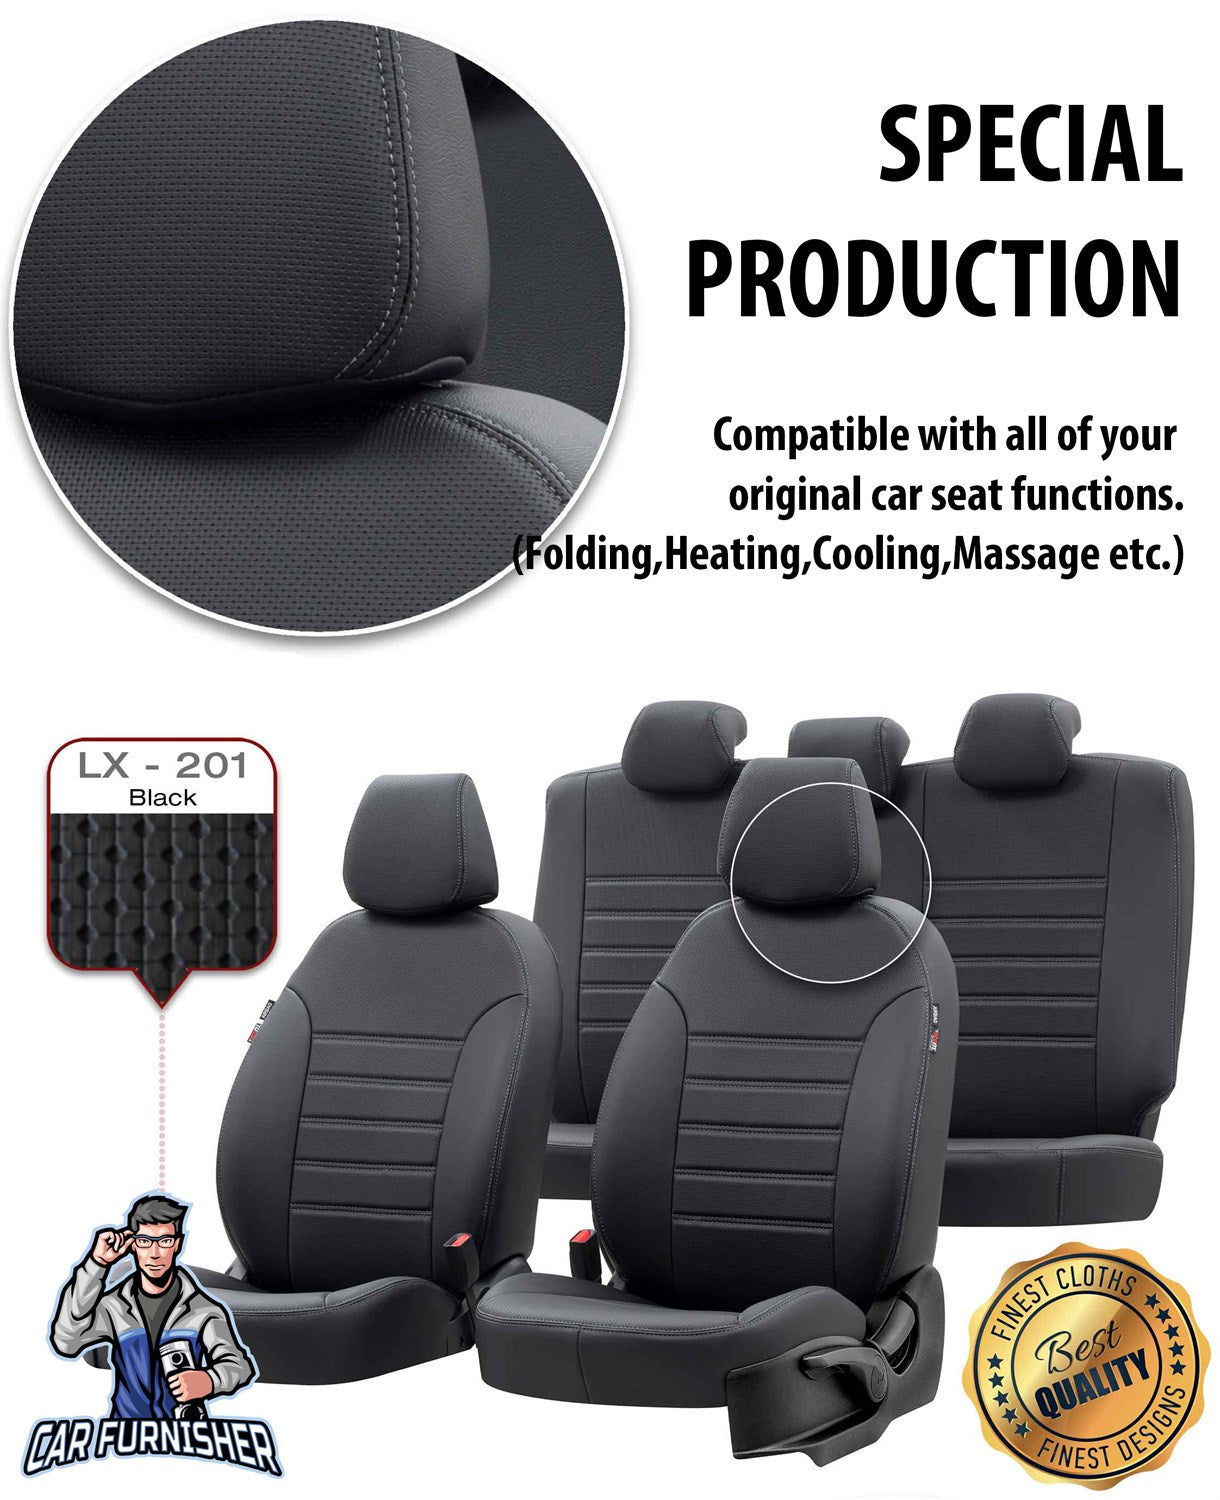 Fiat Freemont Seat Covers New York Leather Design Black Leather